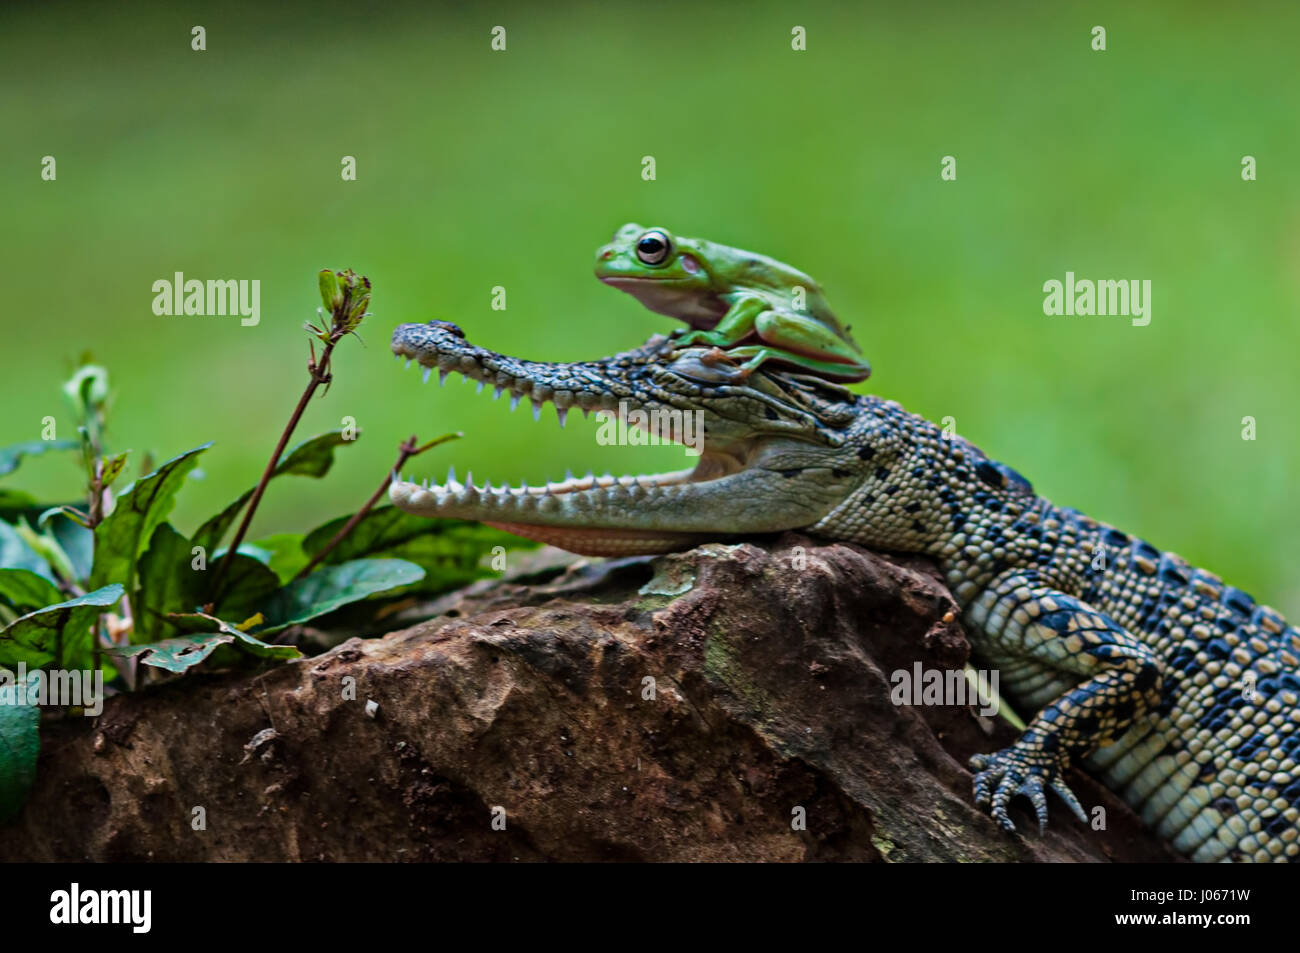 SOUTH JAKARTA, INDONESIA: AMUSING pictures of a brave tree frog appearing to pull open the jaws of a baby saltwater crocodile have been captured by one photographer. The series of funny images show the unlikely pals relaxing together on a tree stump as the frog turns to face the croc head on before posing next to the reptile’s open mouth. Another image shows how the restless amphibian clambered onto the crocodile’s head. The hilarious shots were taken by Roni Kurniawan (26) in South Jakarta, Indonesia. Roni used a Canon 600D camera to capture the surprising encounter. Roni Kurniawan  / mediadr Stock Photo